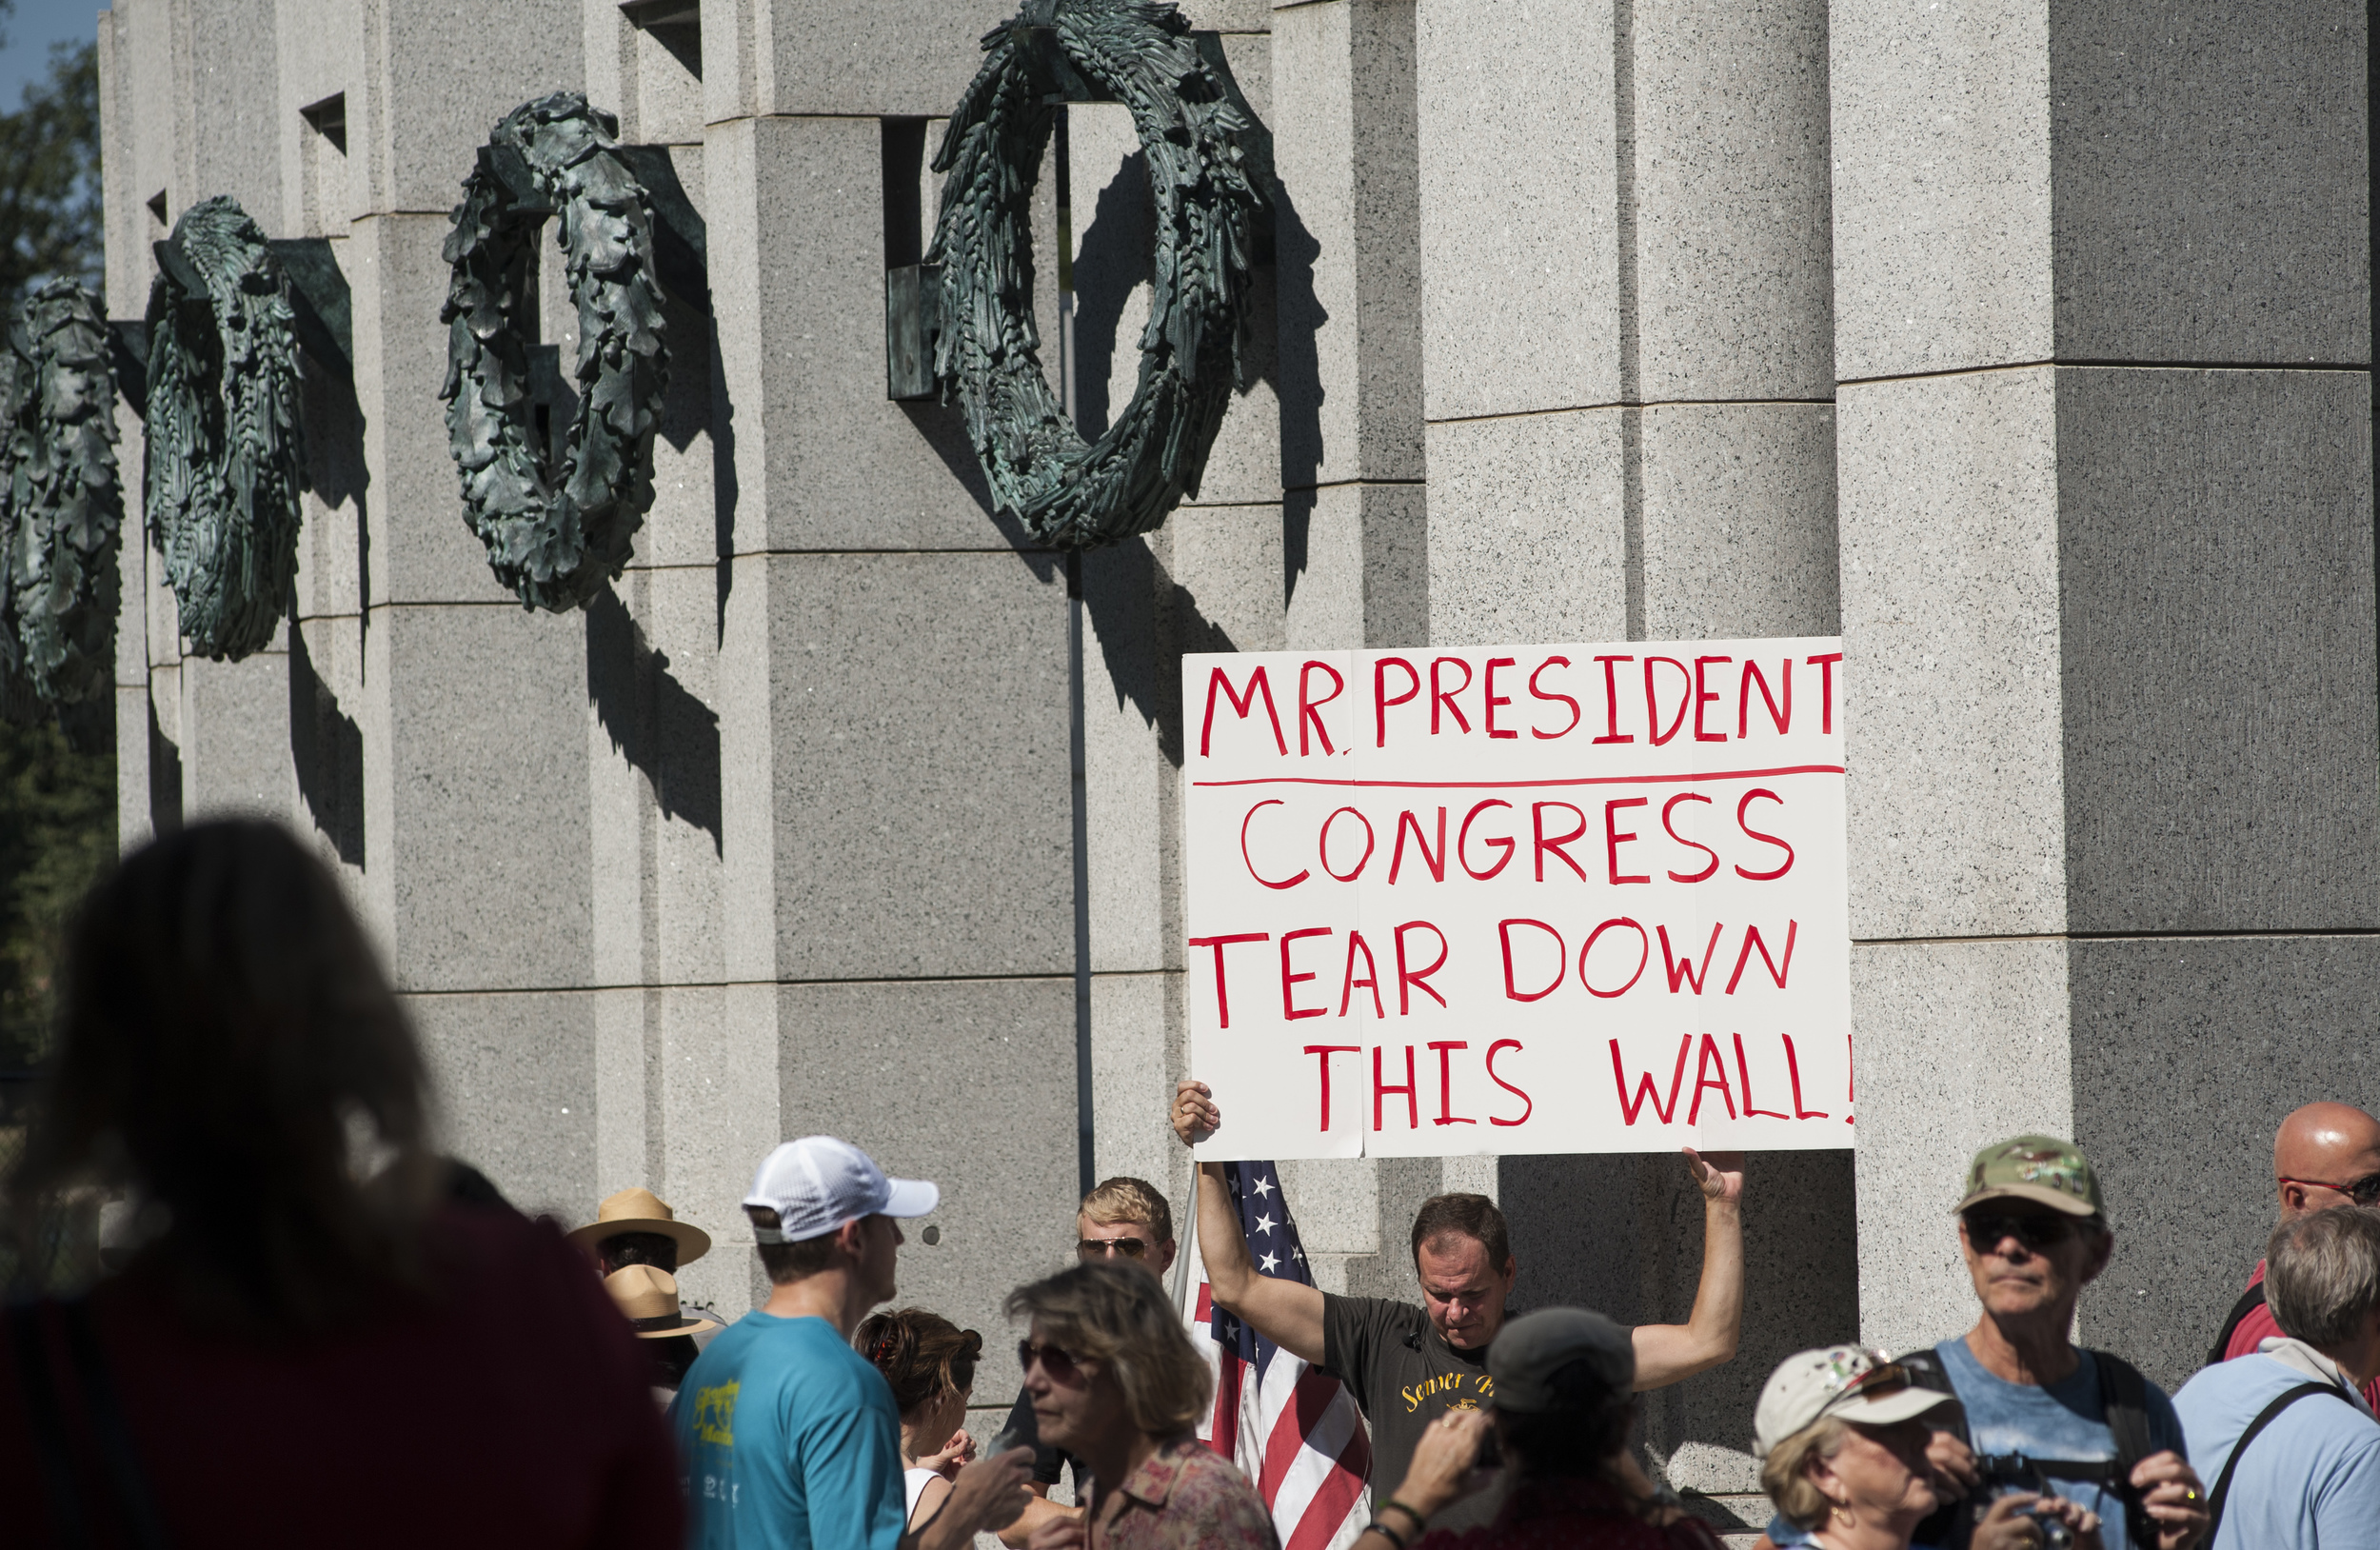 A protester holds up a sign that reads "Mr President, Congress, TEAR DOWN THIS WALL" at the WWII Memorial in Washington, DC amid the Government Shutdown.(Photo by Marlon Correa/The Washington Post)